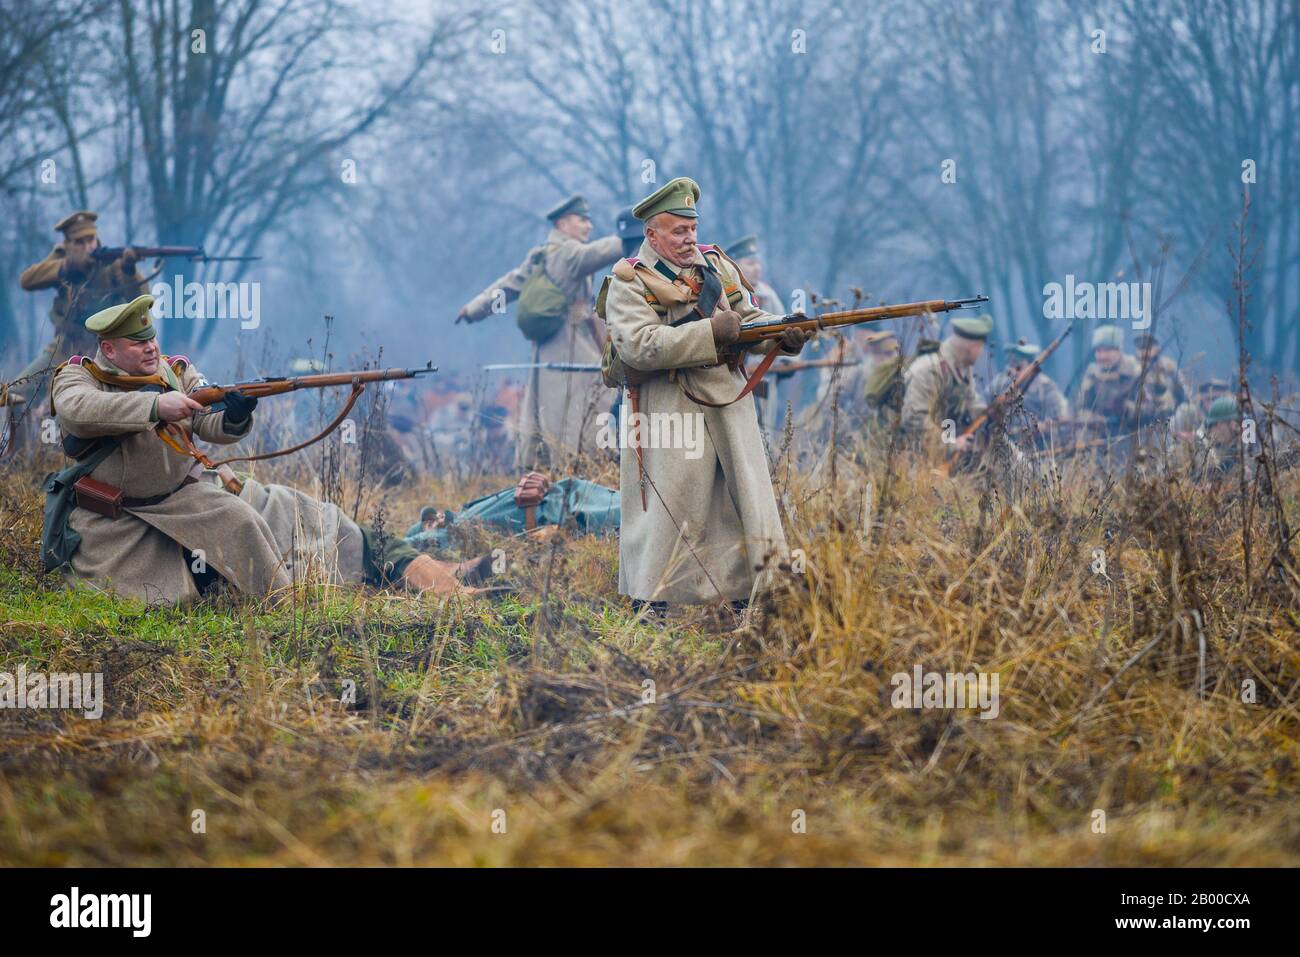 GATCHINA, RUSSIA - NOVEMBER 07, 2015: Infantrymen of the army of General Yudenich on the battlefield. A fragment of the international military-histori Stock Photo